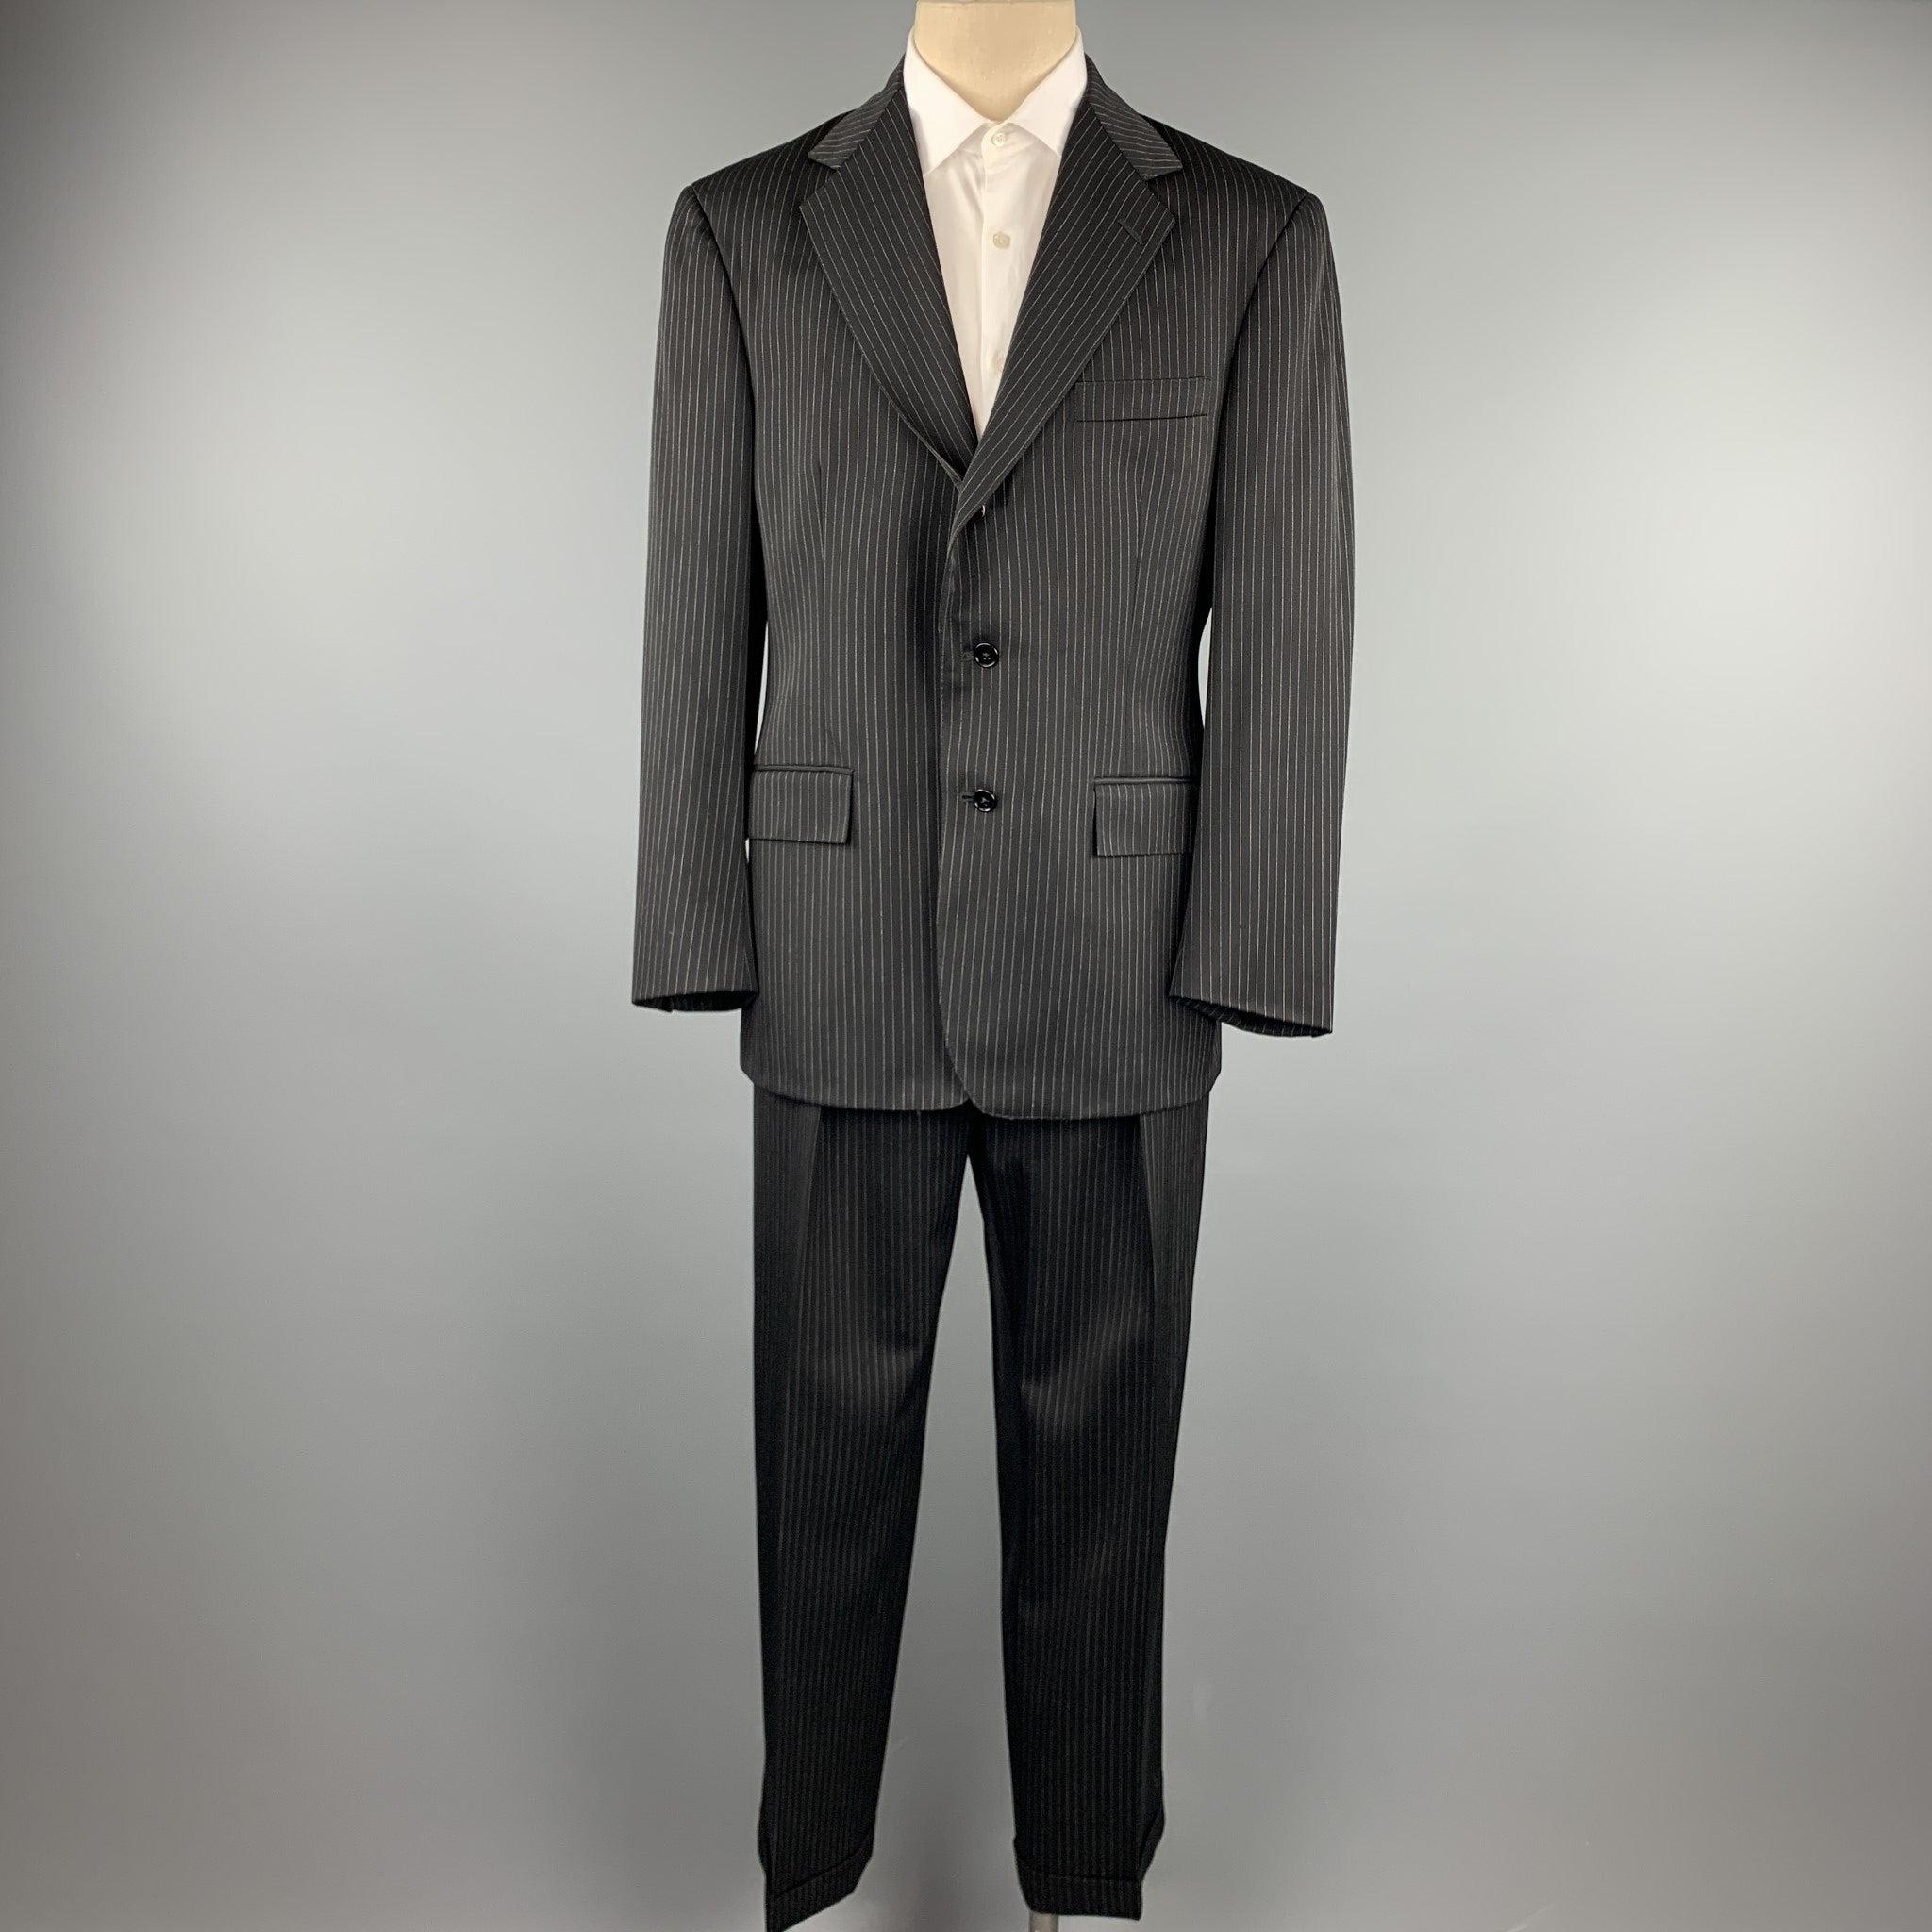 POLO by RALPH LAUREN
suit comes in a black stripe wool and includes a single breasted, three button sport coat with a notch lapel and matching flat front trousers.
Very Good Pre-Owned Condition. 

Marked:   40 

Measurements: 
  -JacketShoulder: